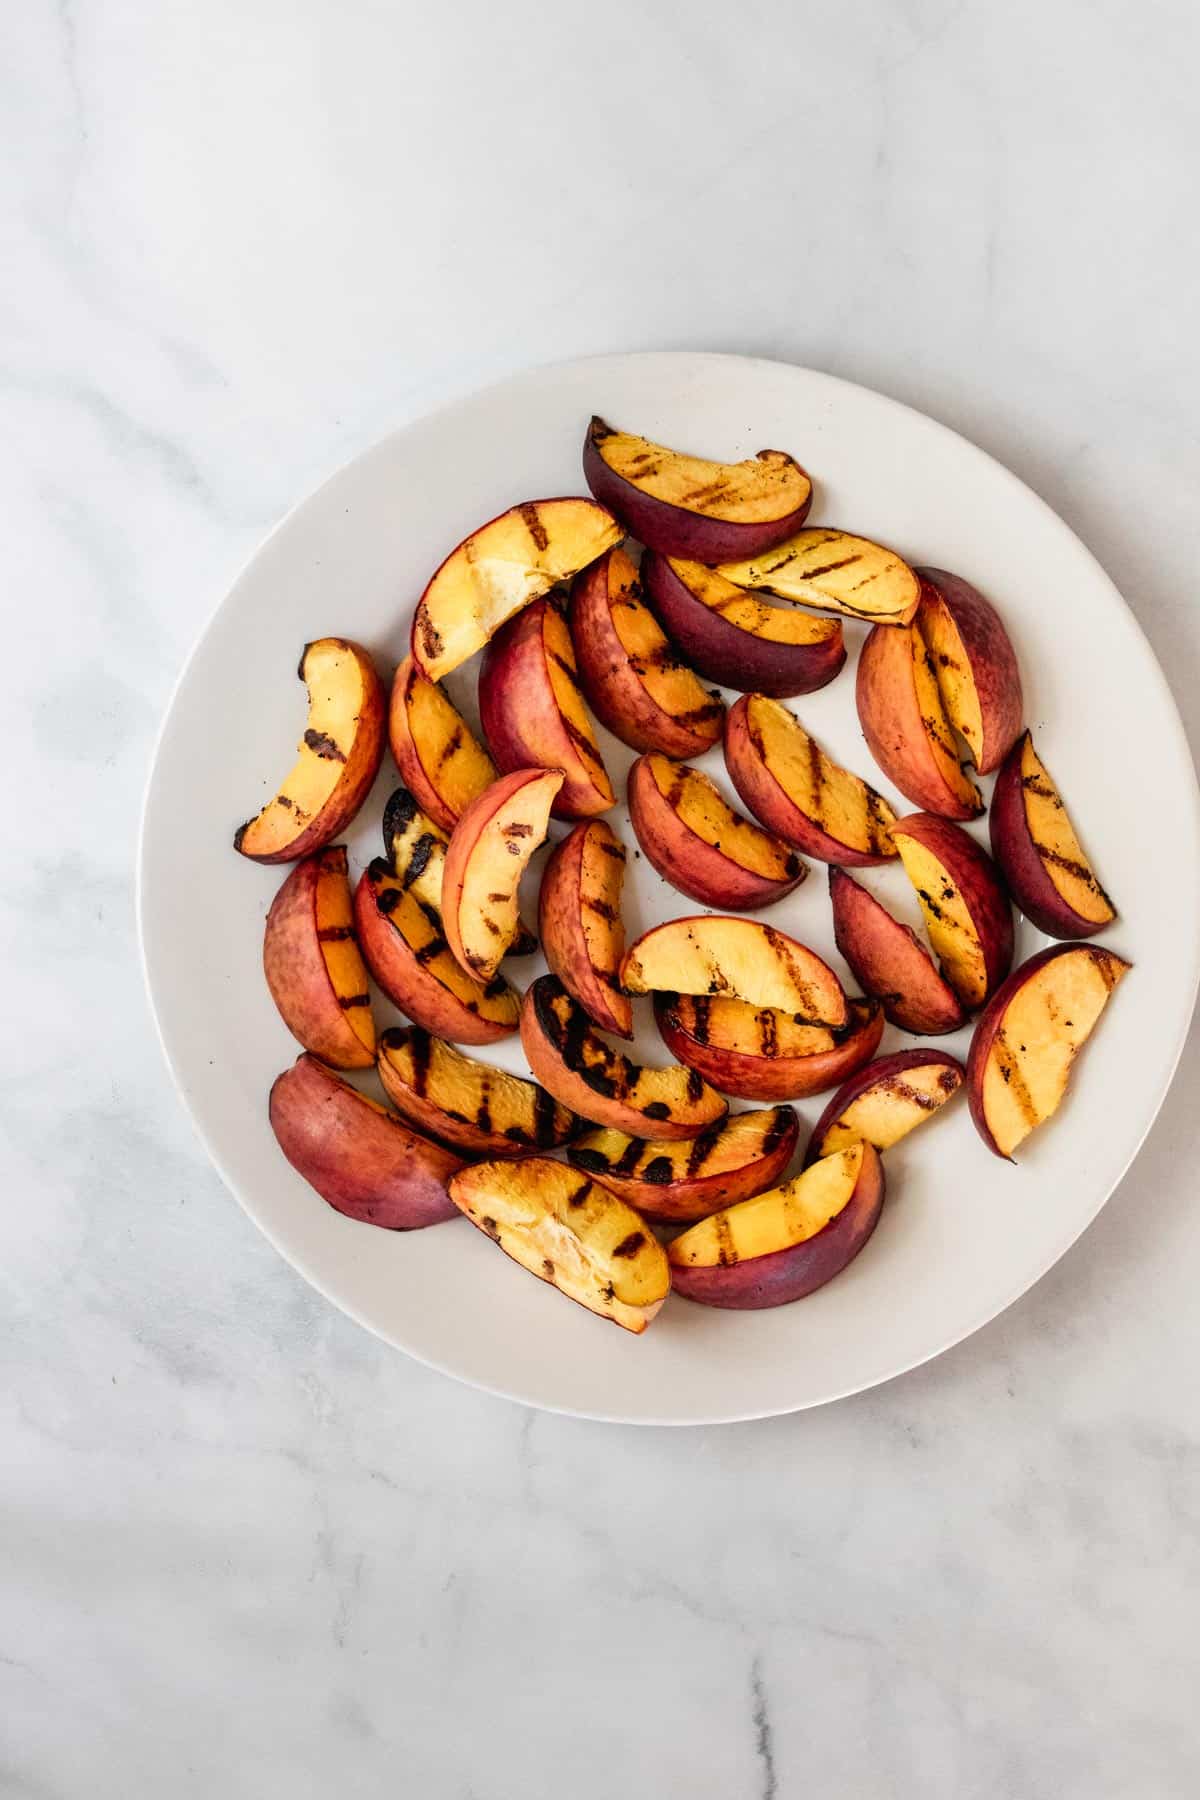 Grilled peach slices on a white plate.